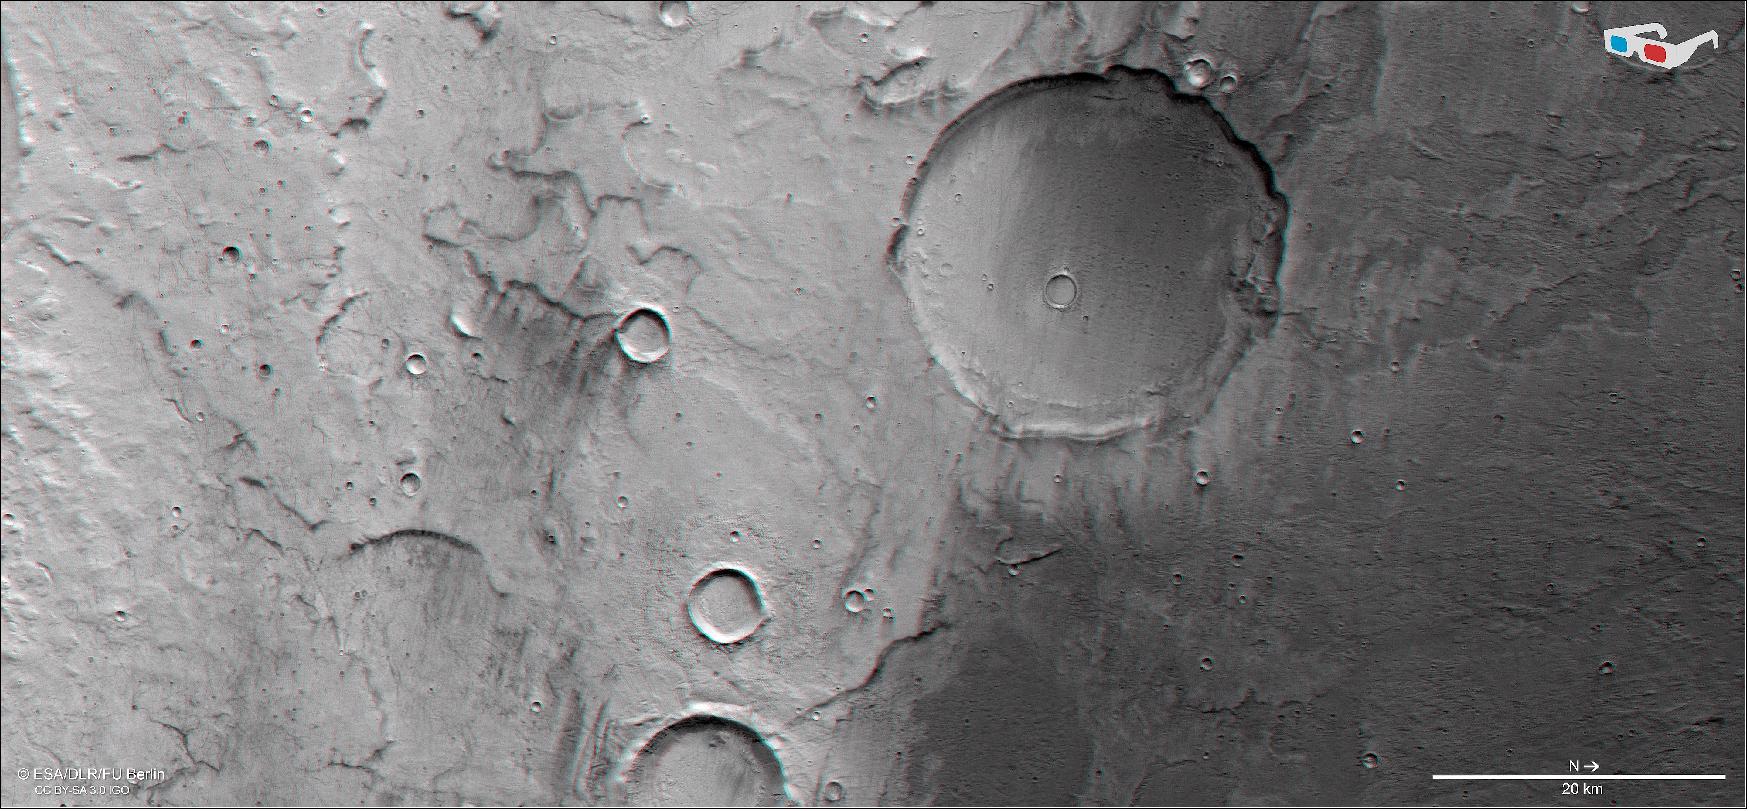 Figure 24: Terra Cimmeria in 3D. This image shows Terra Cimmeria, a region found in the southern highlands of Mars, in 3D when viewed using red-green or red-blue glasses. This anaglyph was derived from data obtained by the nadir and stereo channels of the HRSC on ESA's Mars Express during spacecraft orbit 18904. It covers a part of the martian surface centered at about 171º East and 40º South. North is to the right(image credit: ESA/DLR/FU Berlin, CC BY-SA 3.0 IGO)